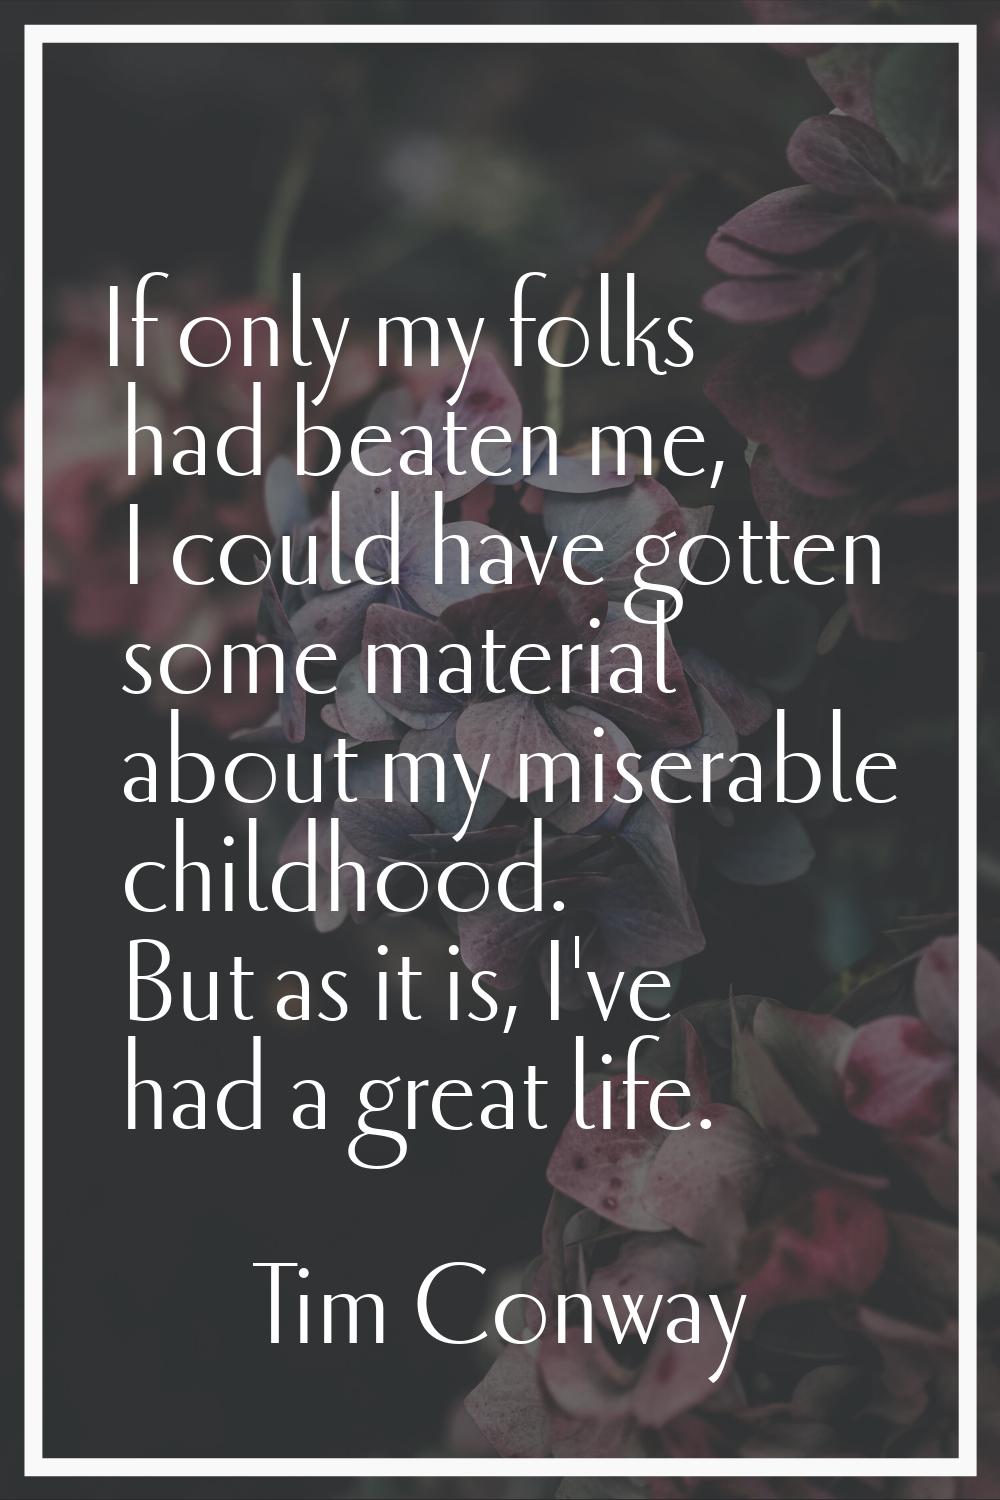 If only my folks had beaten me, I could have gotten some material about my miserable childhood. But